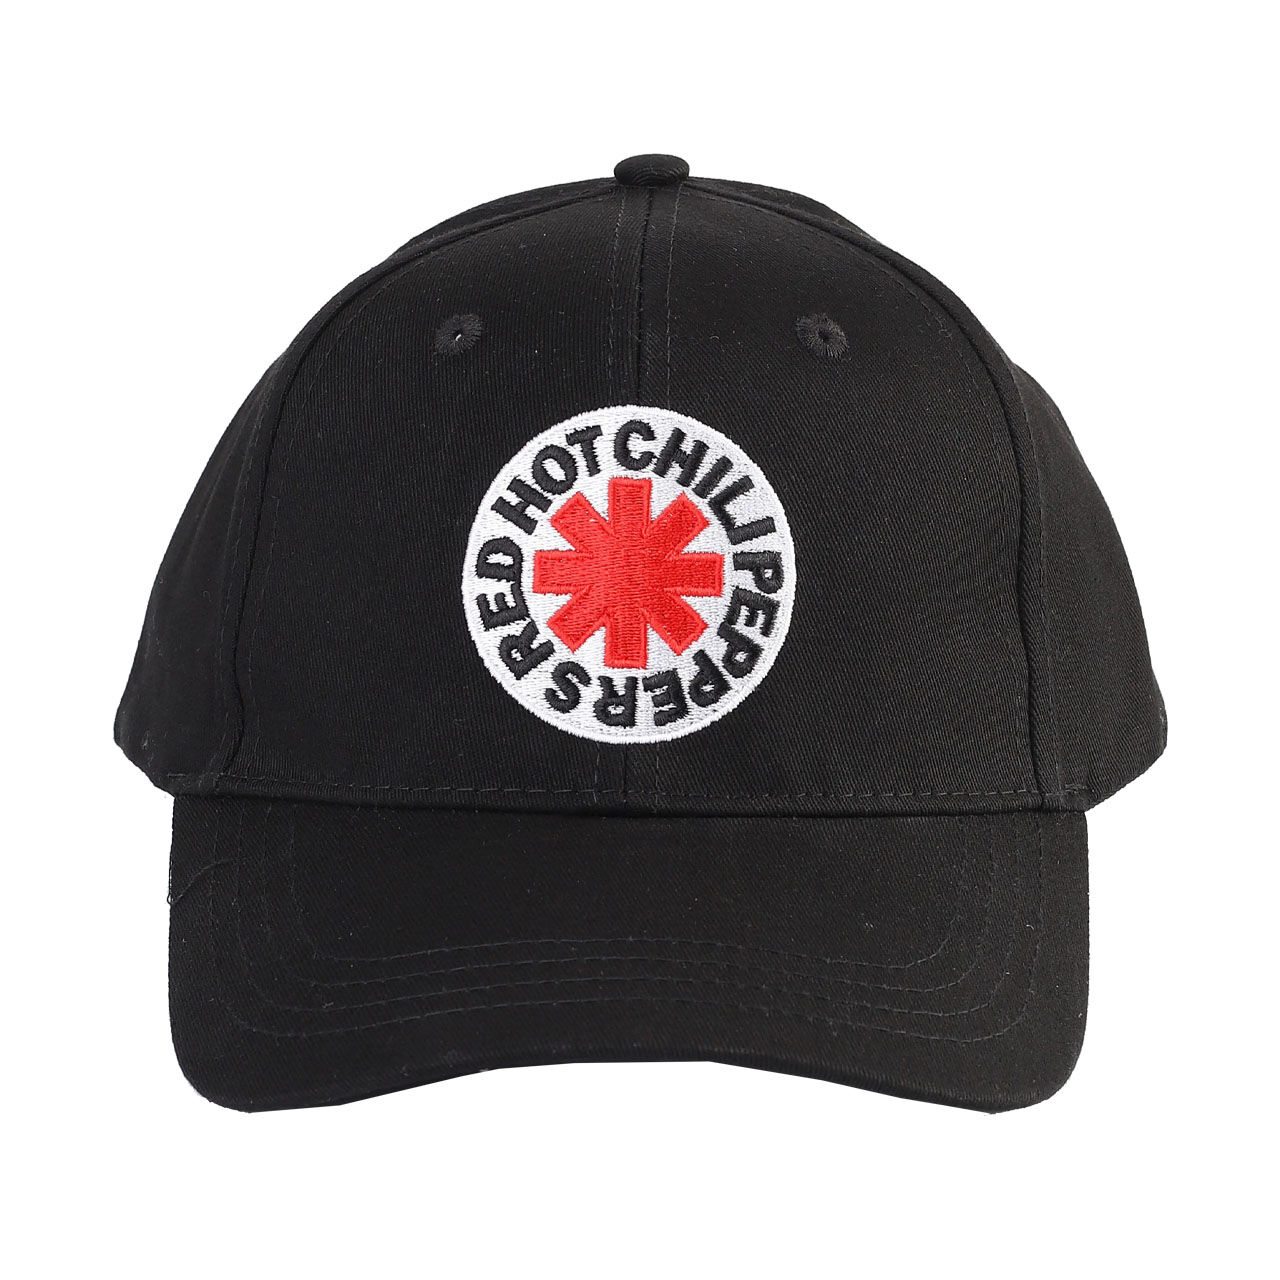 RED HOT CHILI PEPPERS Classic Asterisk Hat/Cap